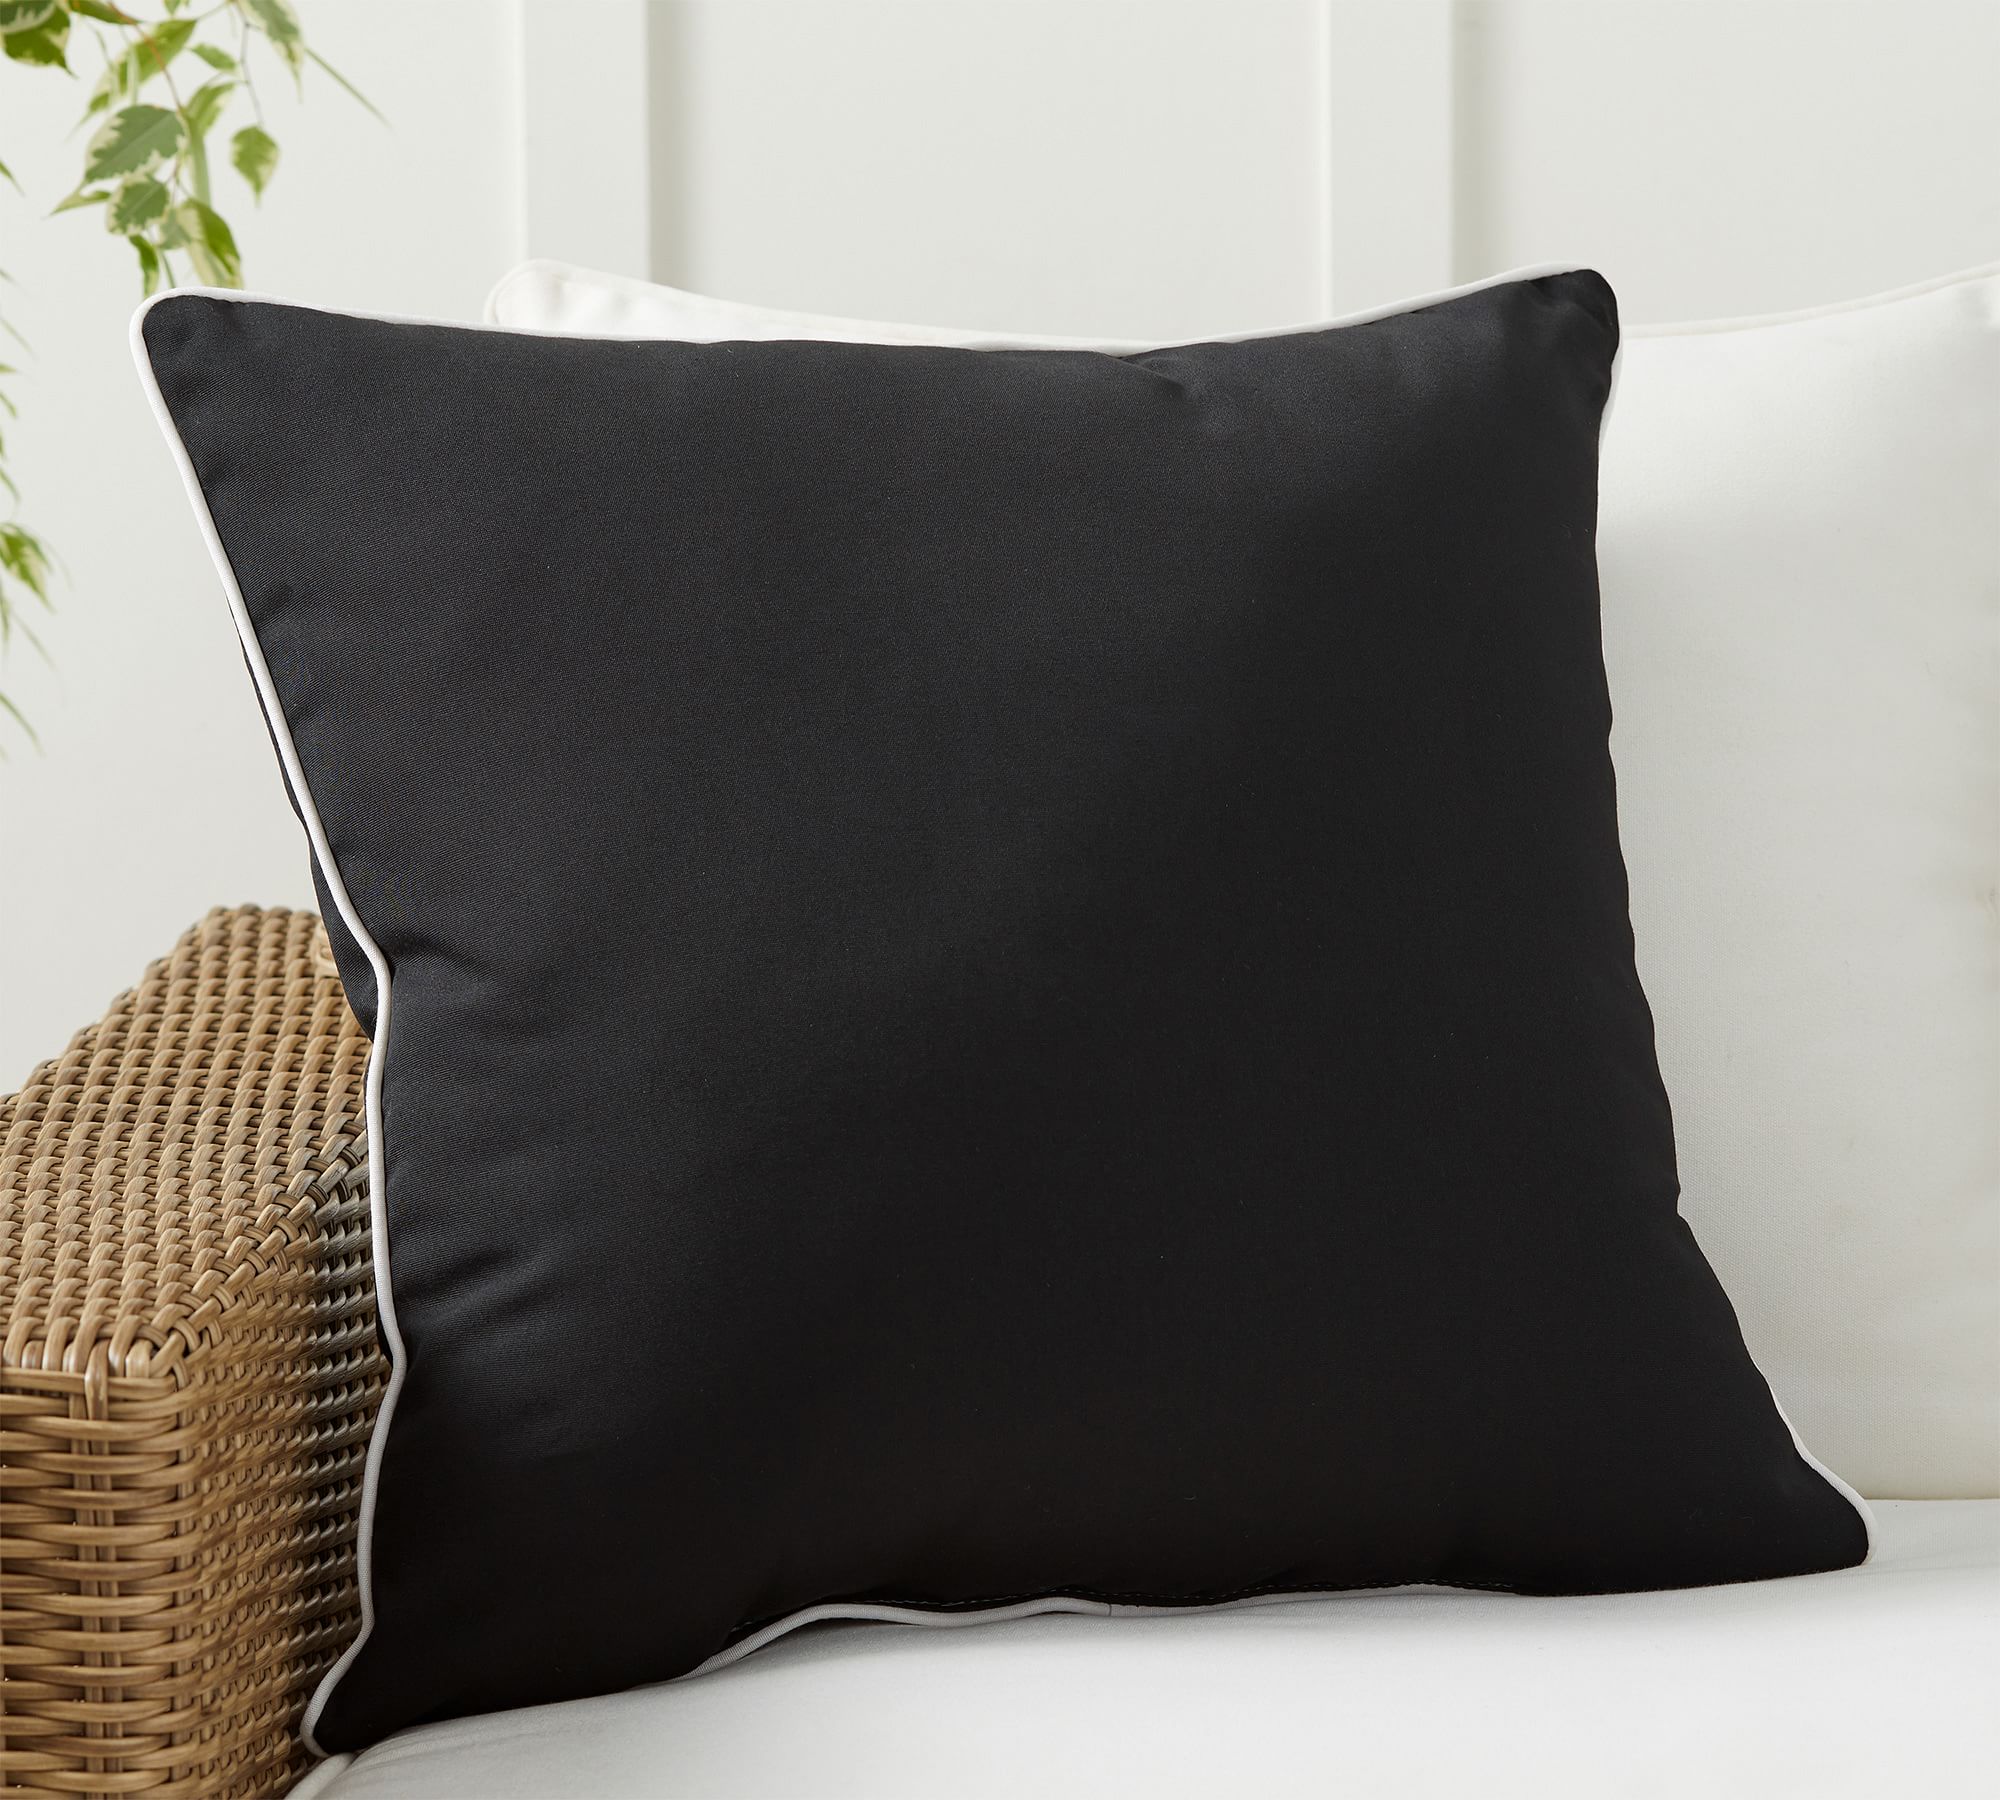 Sunbrella® Contrast Piped Solid Outdoor Pillow